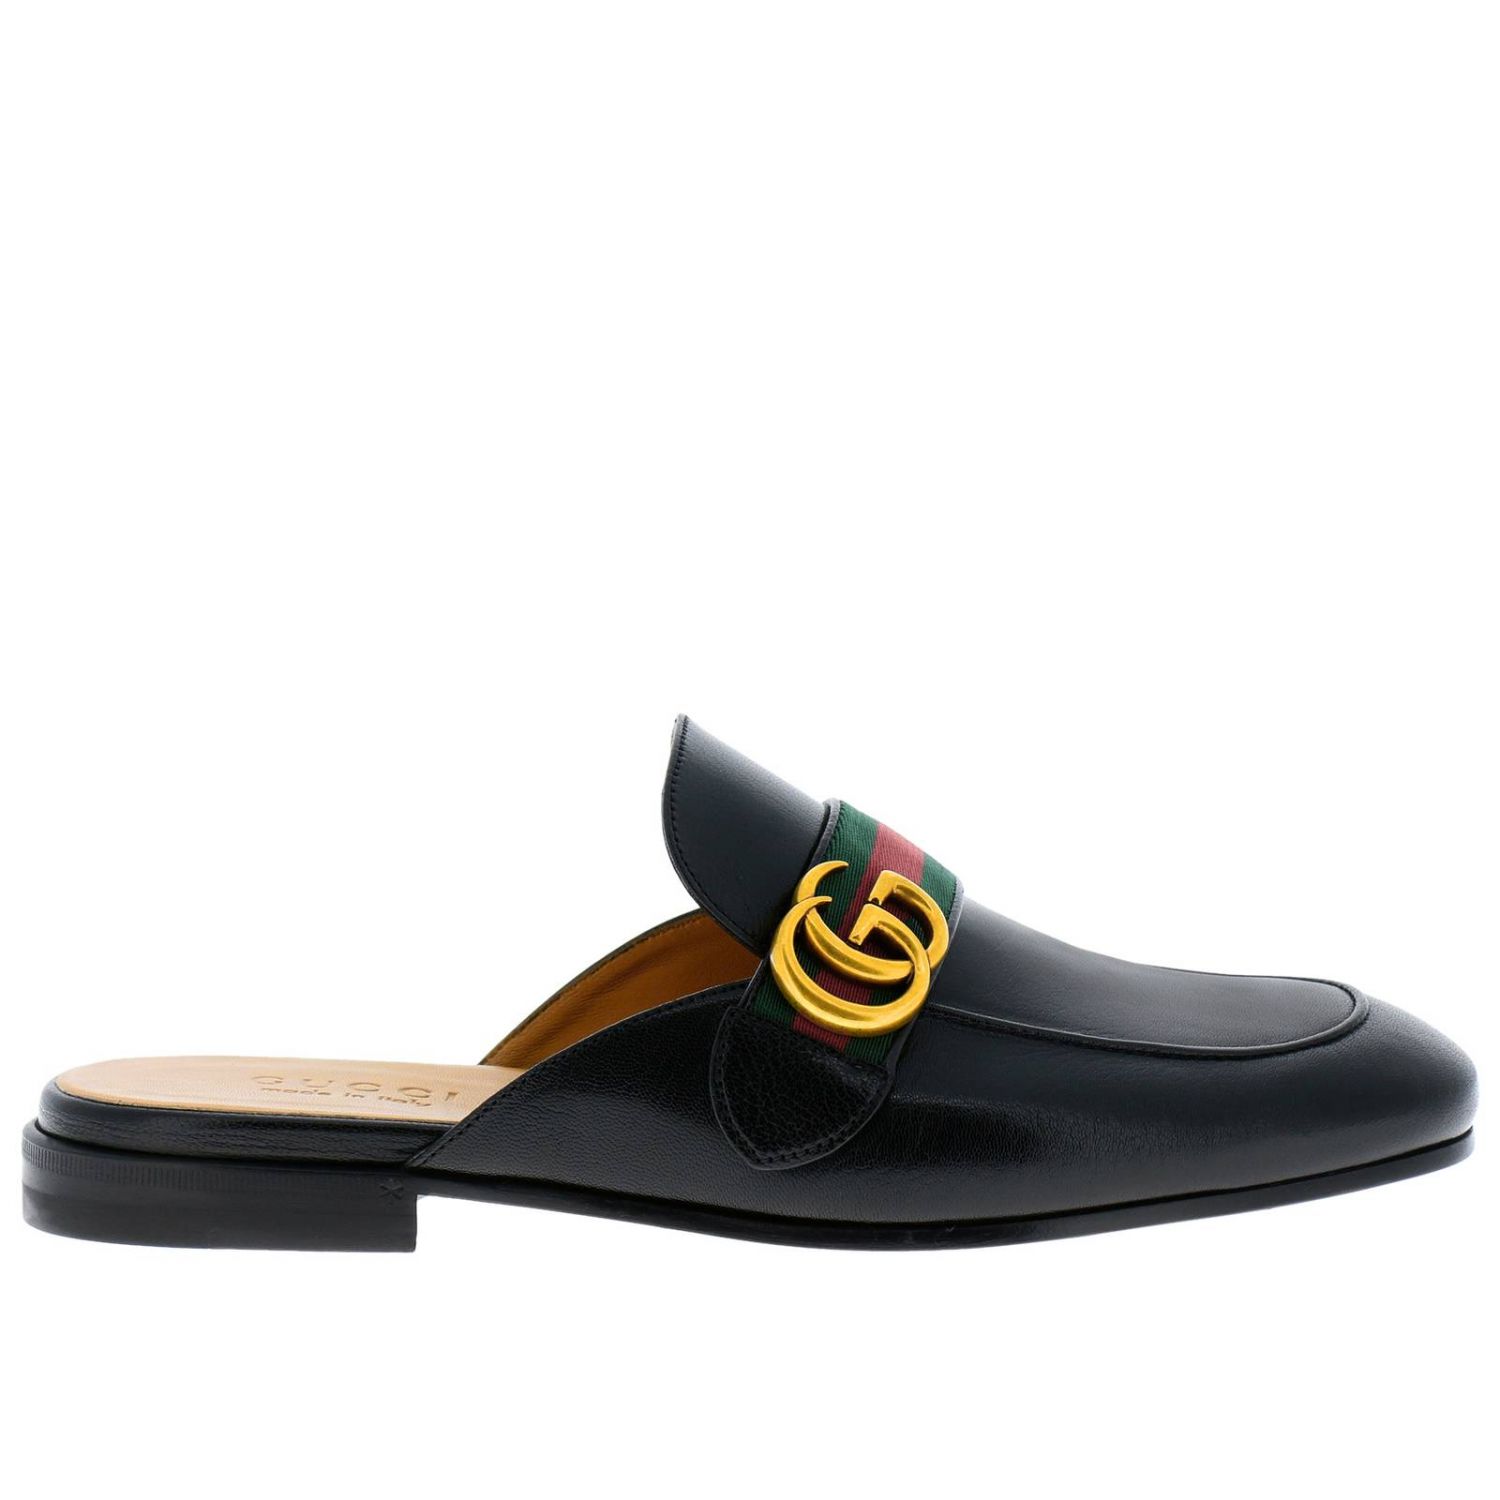 Shoes men Gucci | Loafers Gucci Men Black | Loafers Gucci 469891 D3VN0 Giglio UK